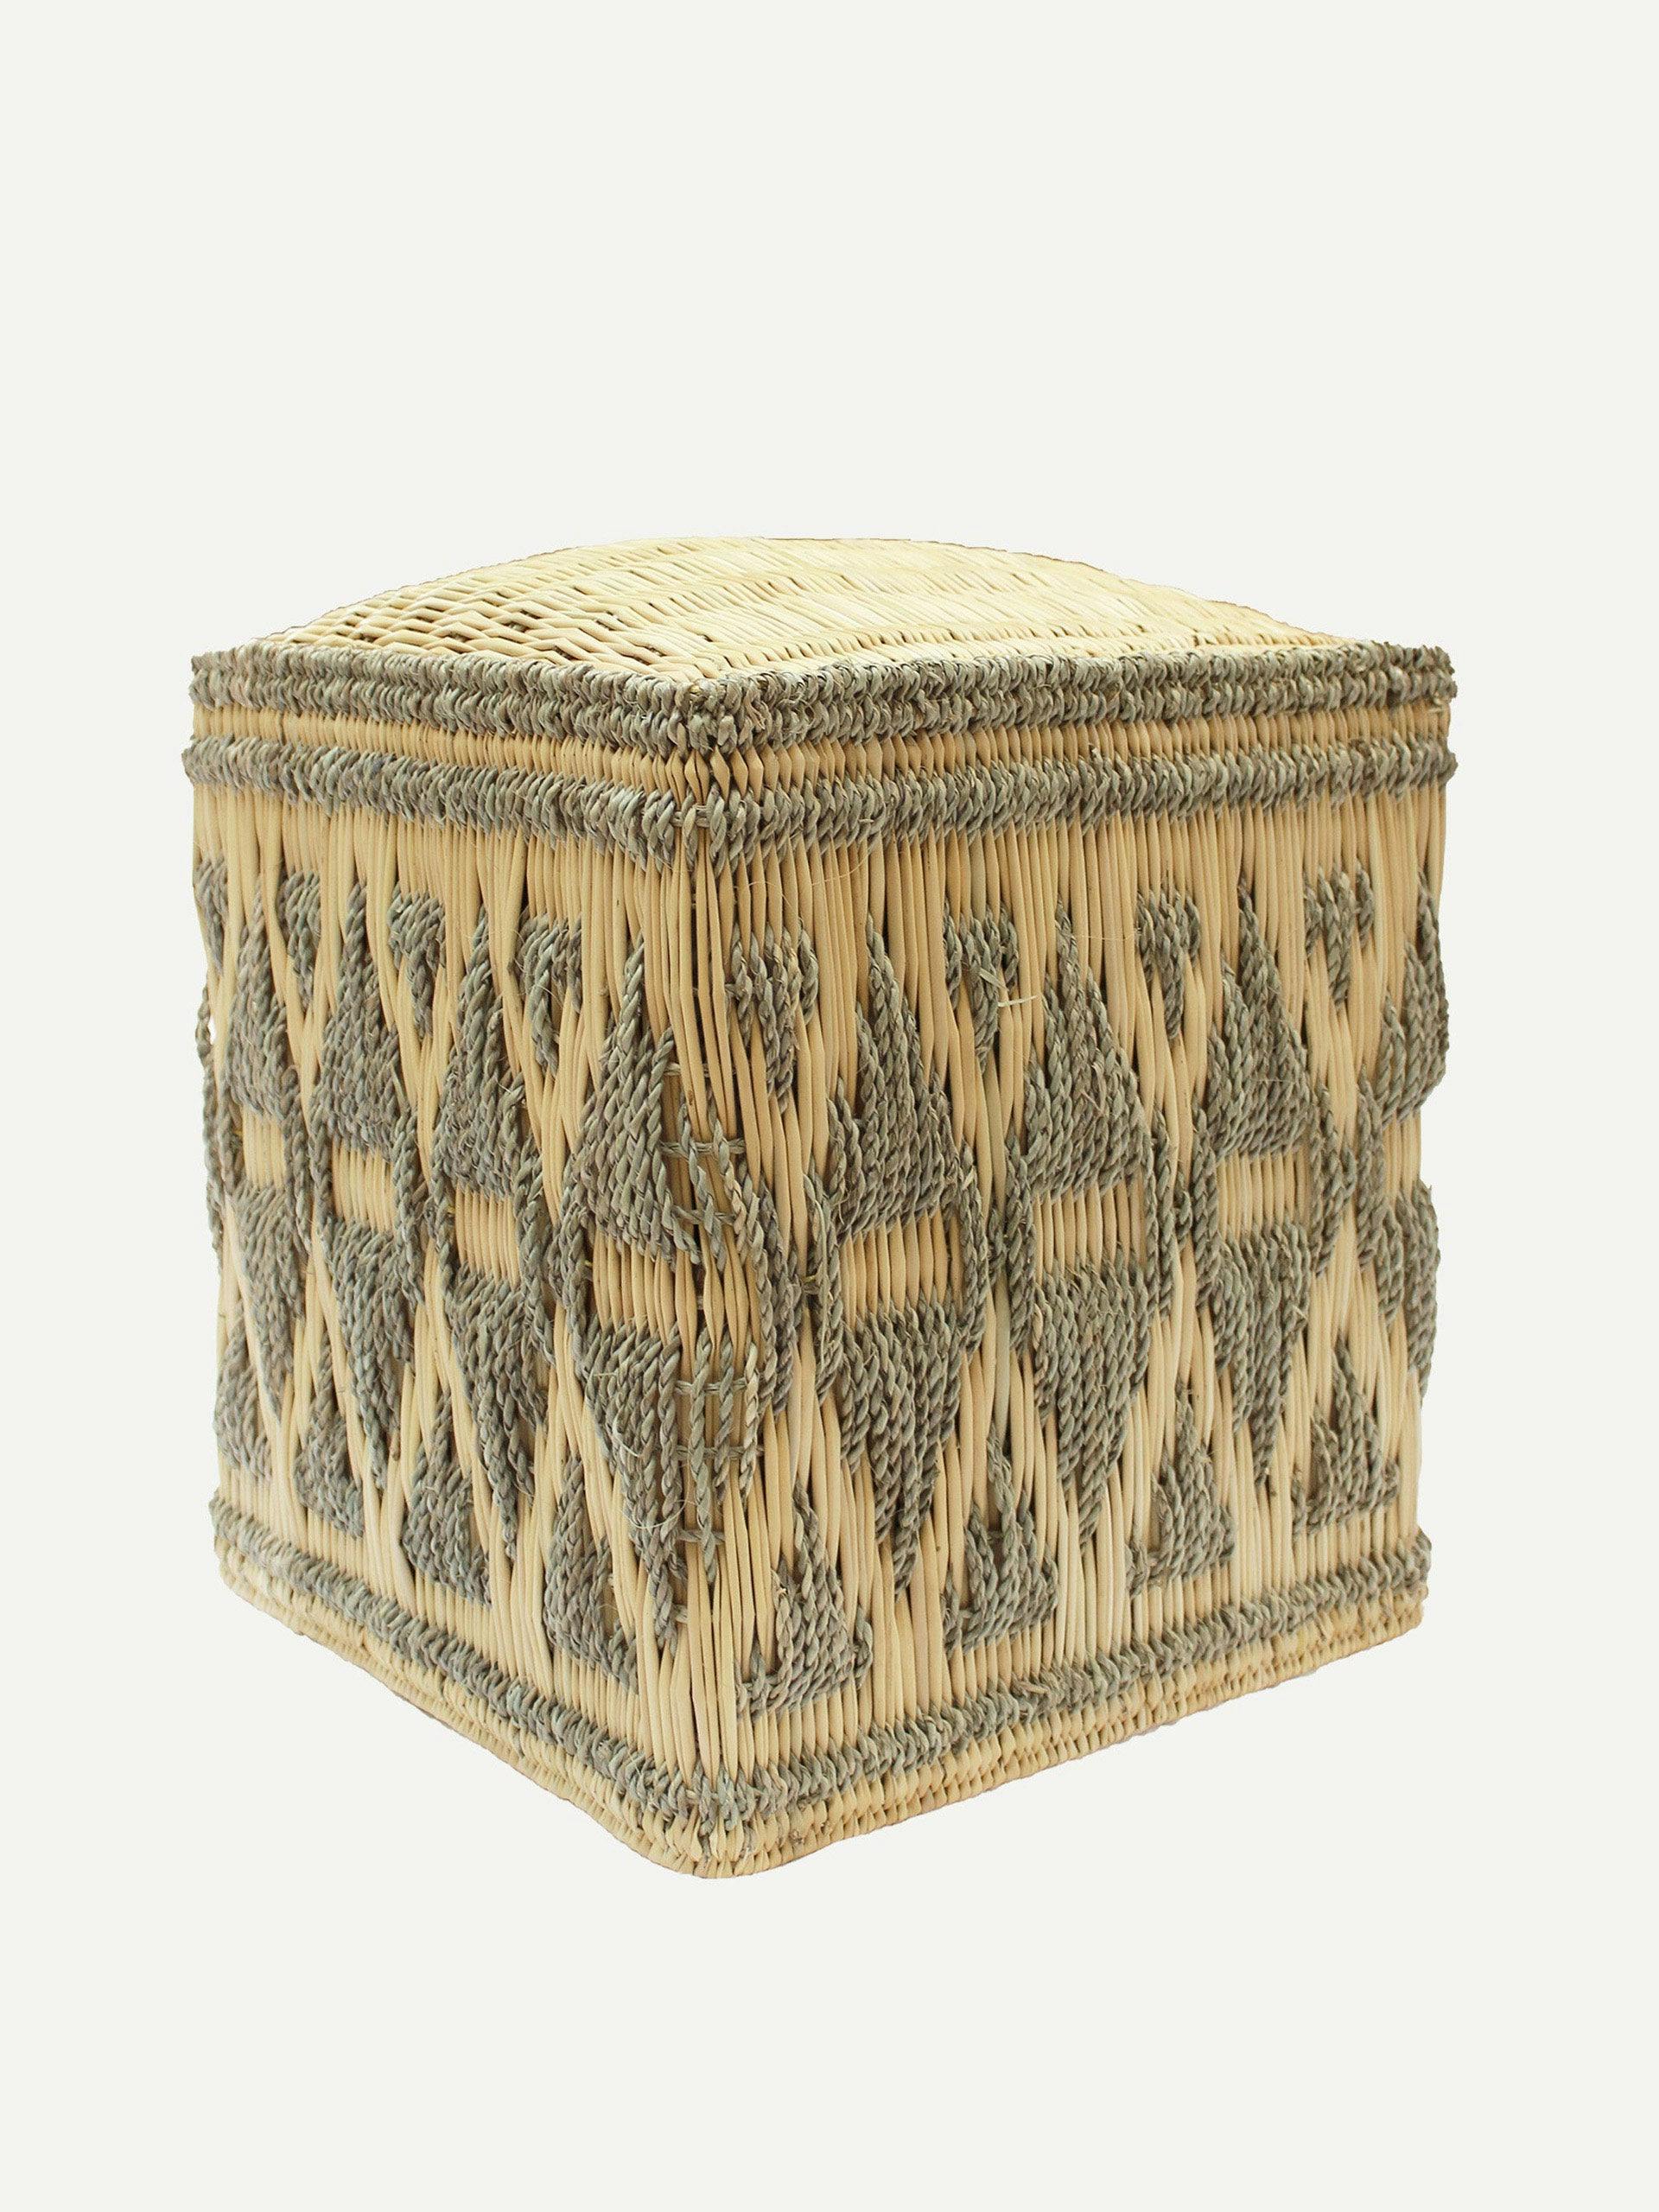 Fez natural wicker stool